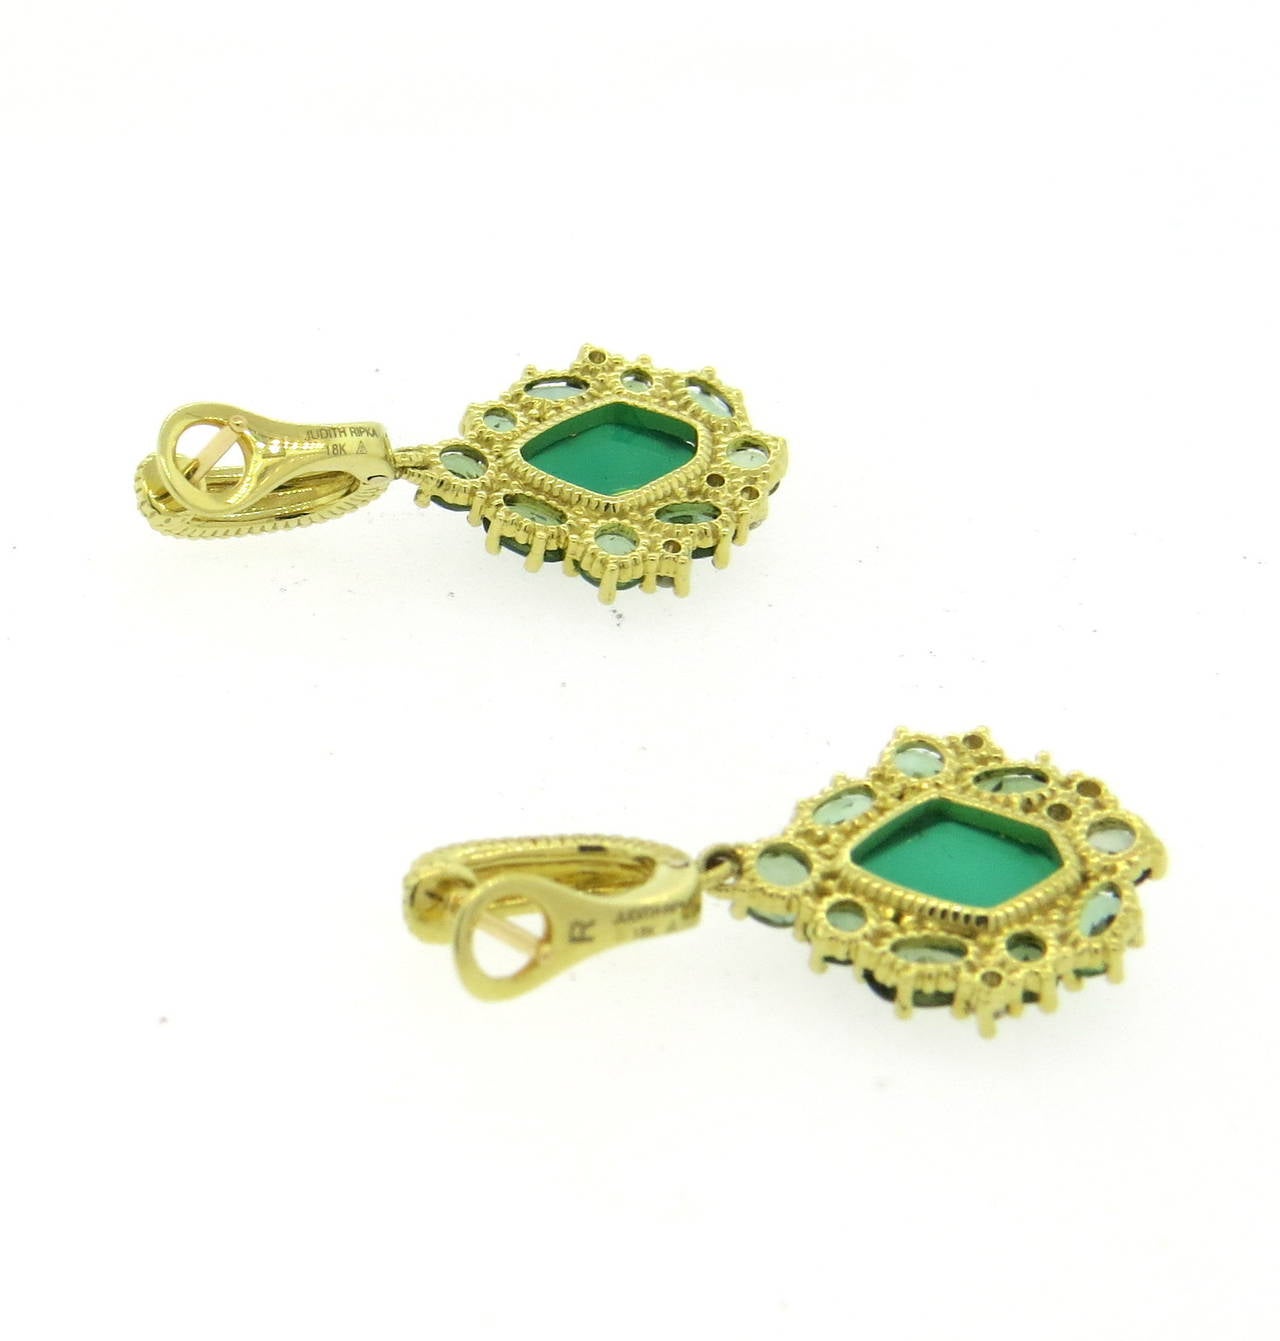 A pair of 18k yellow gold earrings set with approximately 0.20ctw of G/VS diamonds, green chalcedony, quartz and tourmaline.  Crafted by Judith Ripka, the earrings measure 35mm x 17mm and weigh 9.7 grams.  Marked Judith Ripka 18k.